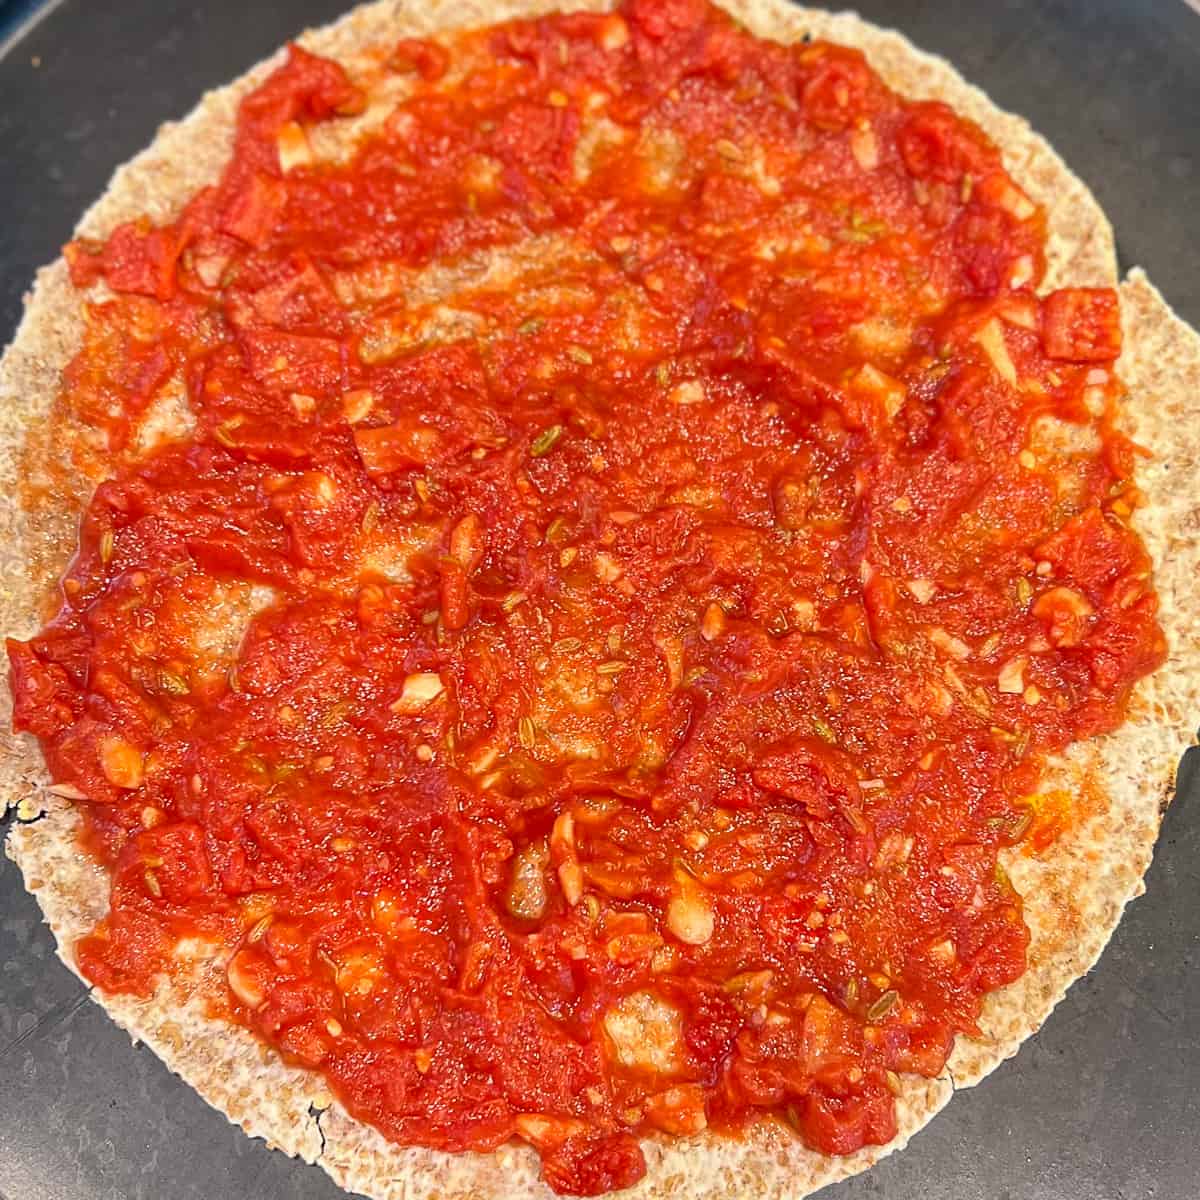 tomato sauce spread on a sprouted grain tortilla being used as the pizza crust